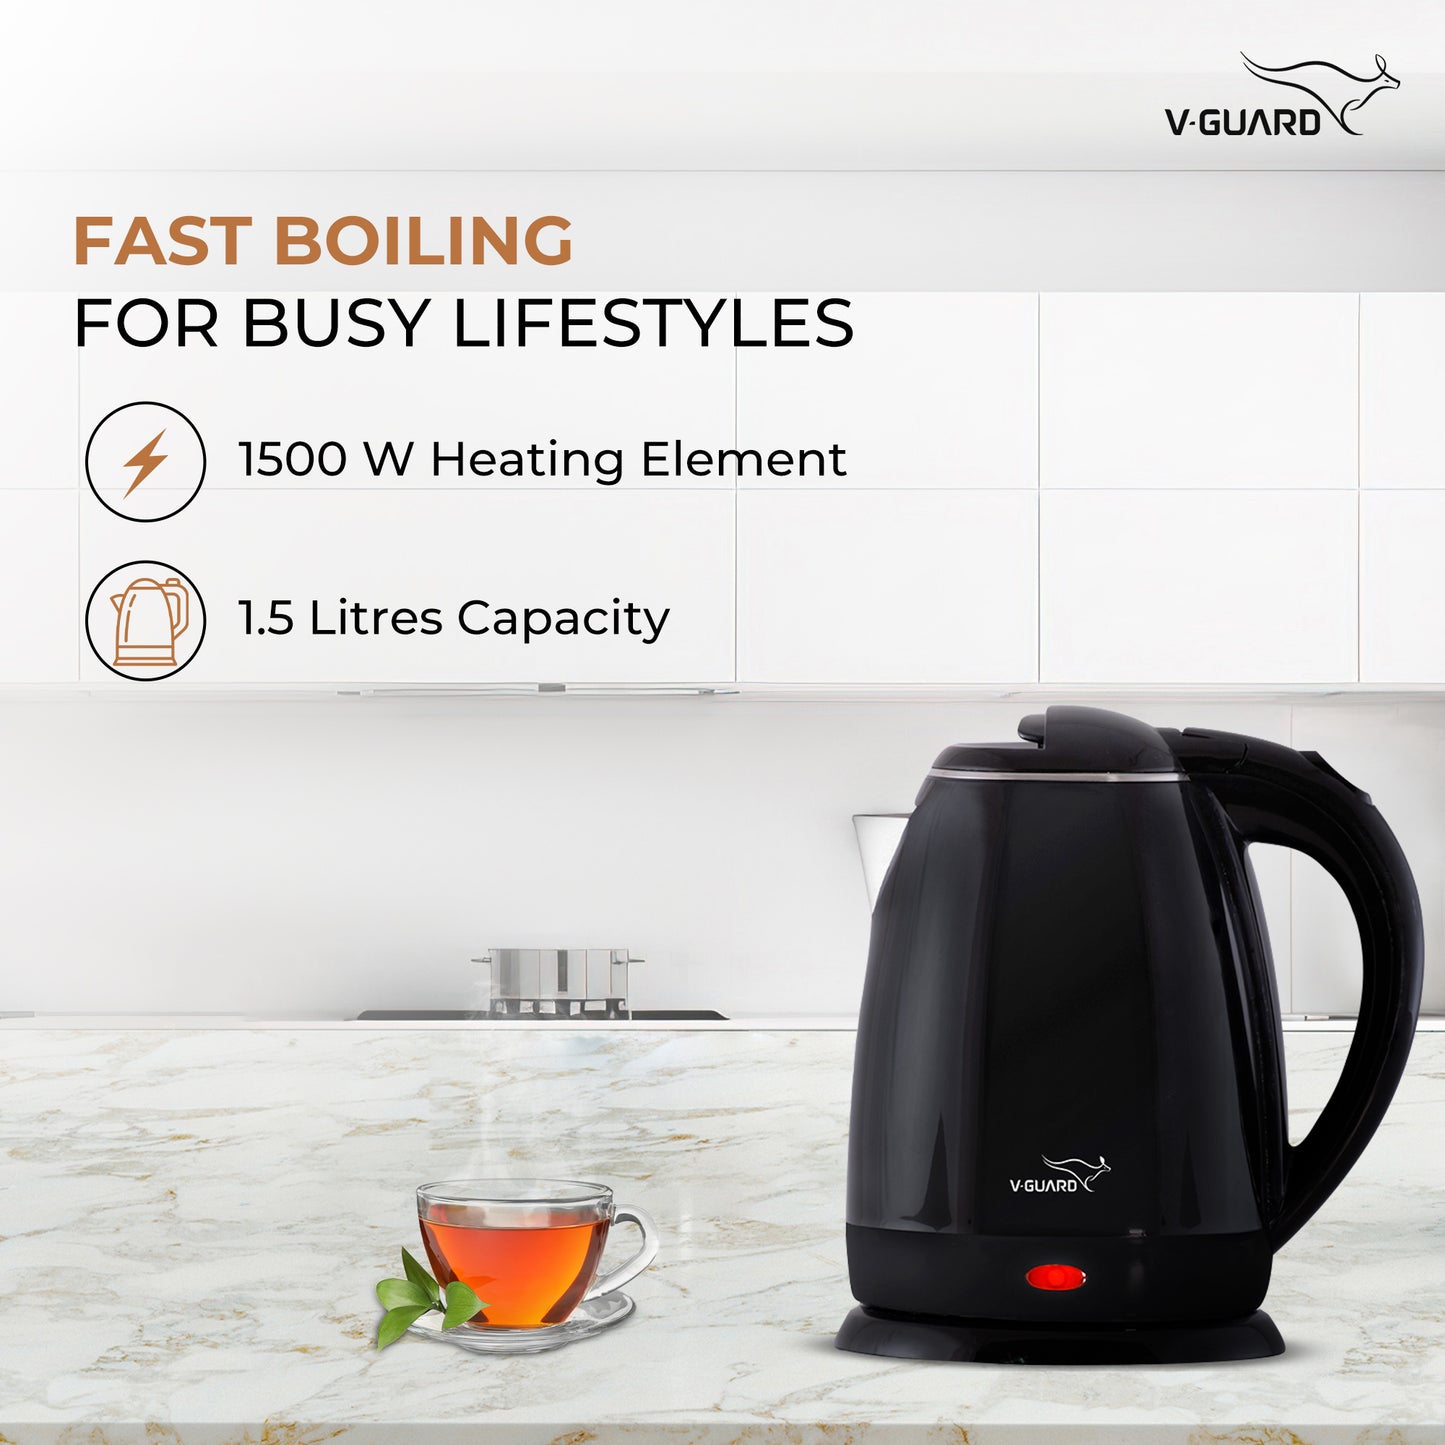 VKP15 Prime 1.5 Litre Electric Kettle for hot water | Double Wall with Cool Touch Body | 2 year warranty |1500 Watt